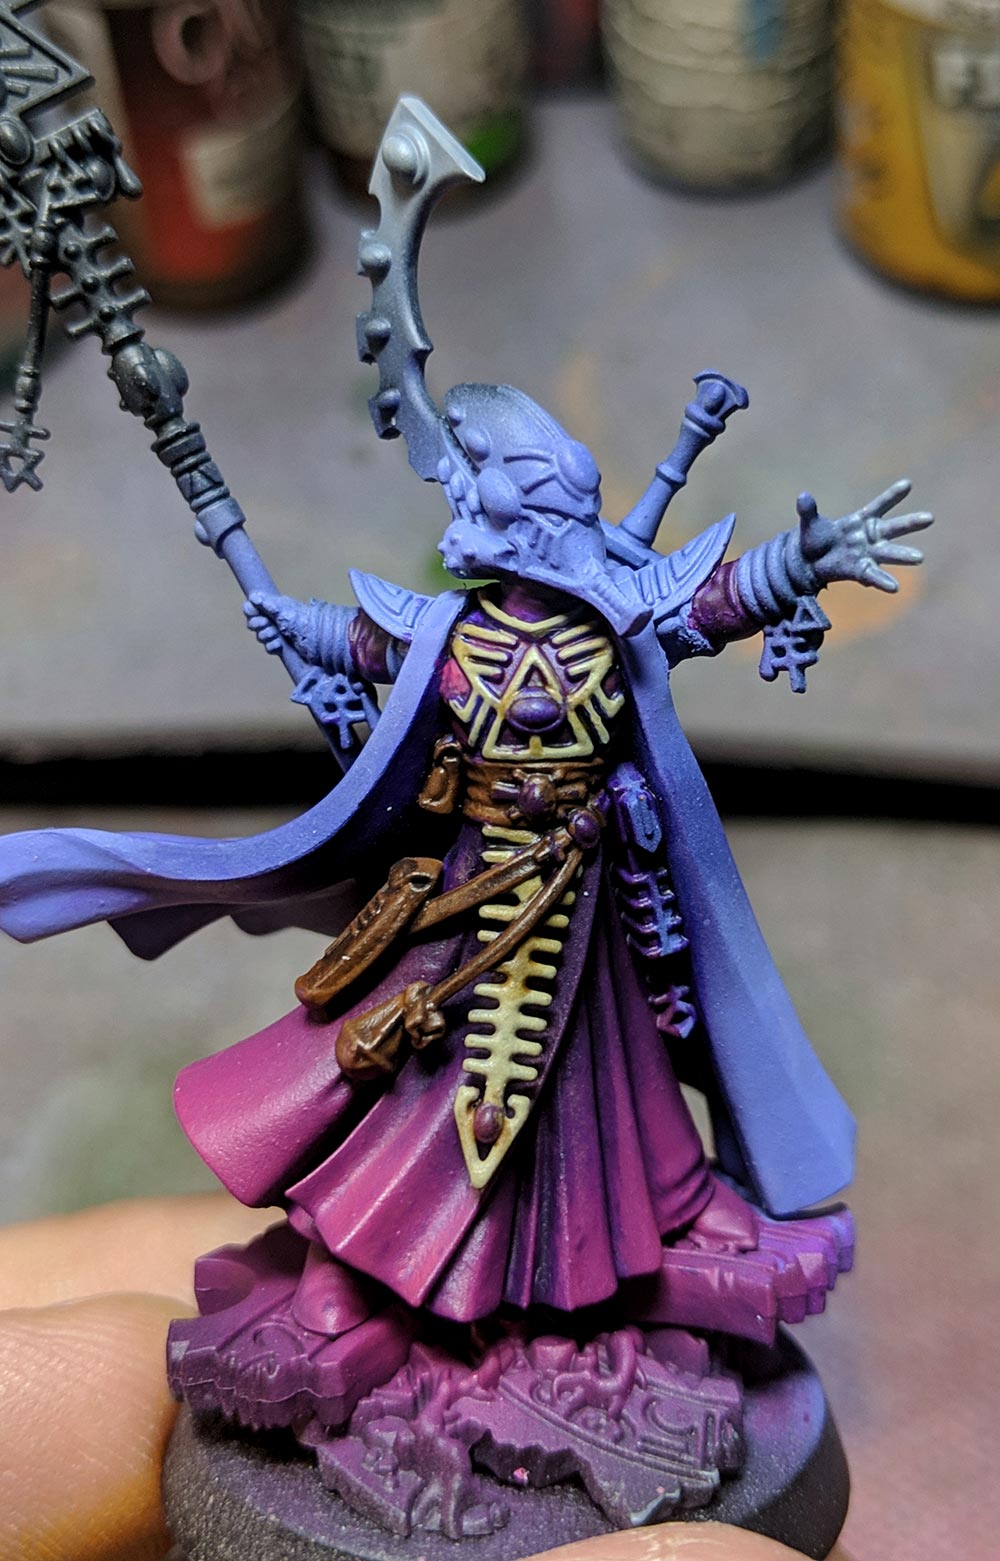 News From The Front: MTSC TRENCH RUNNER DISPATCH: John Paul is Living the  Fantasy with Nocturna Fantasy Pro Paints